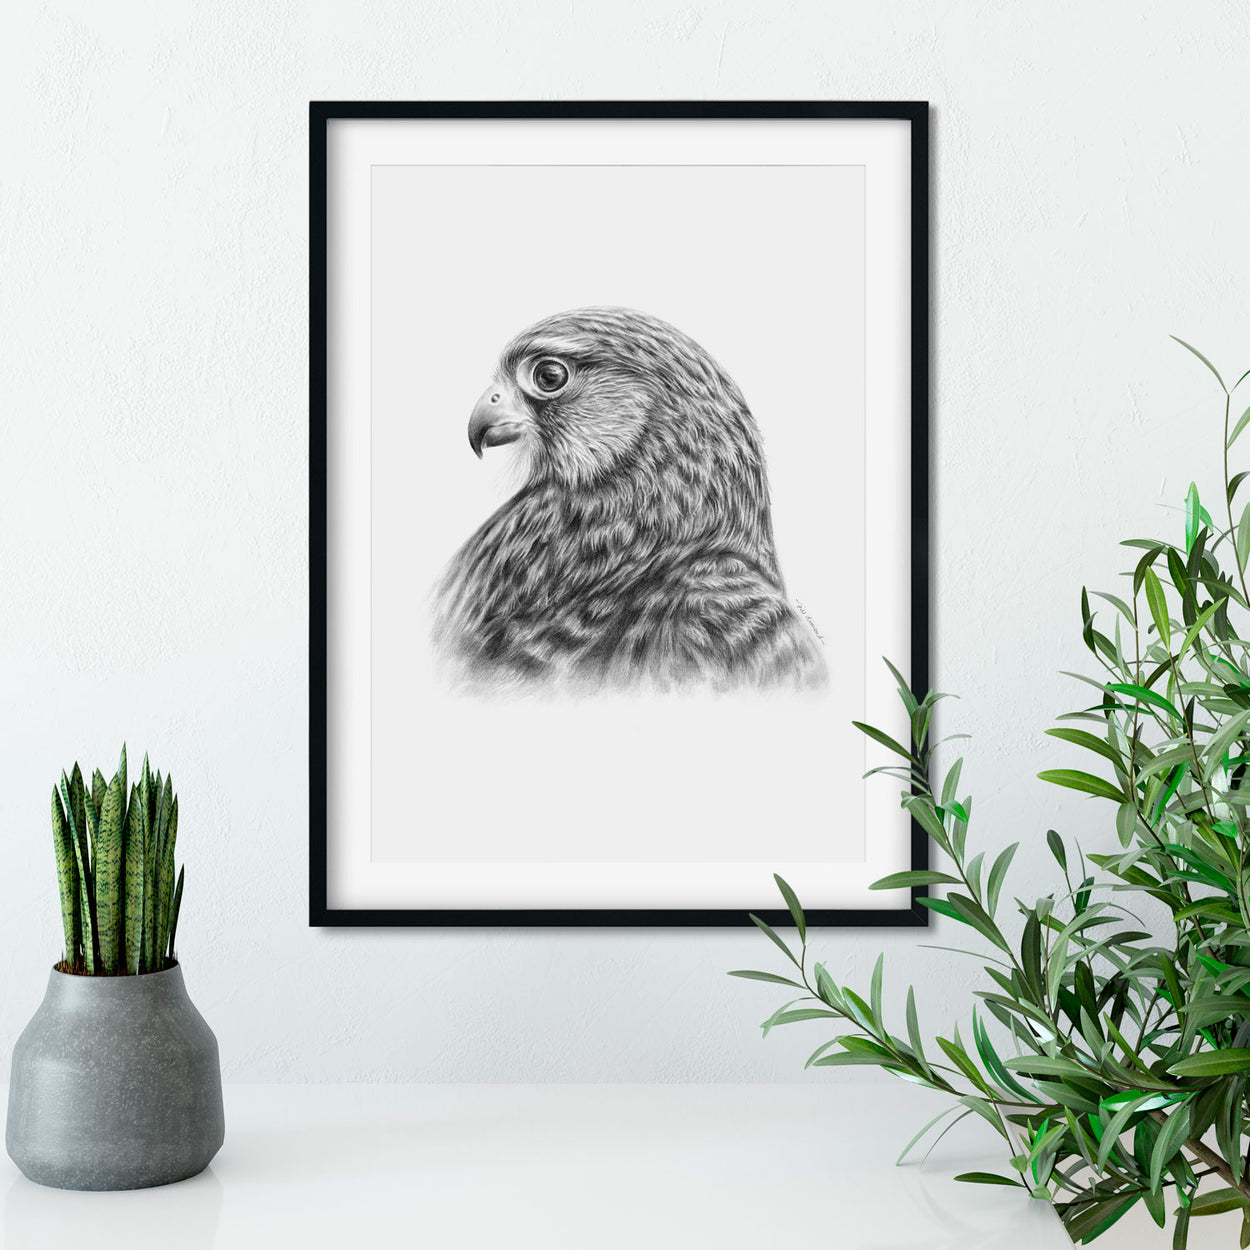 Kestrel Drawing in Frame on Wall - The Thriving Wild